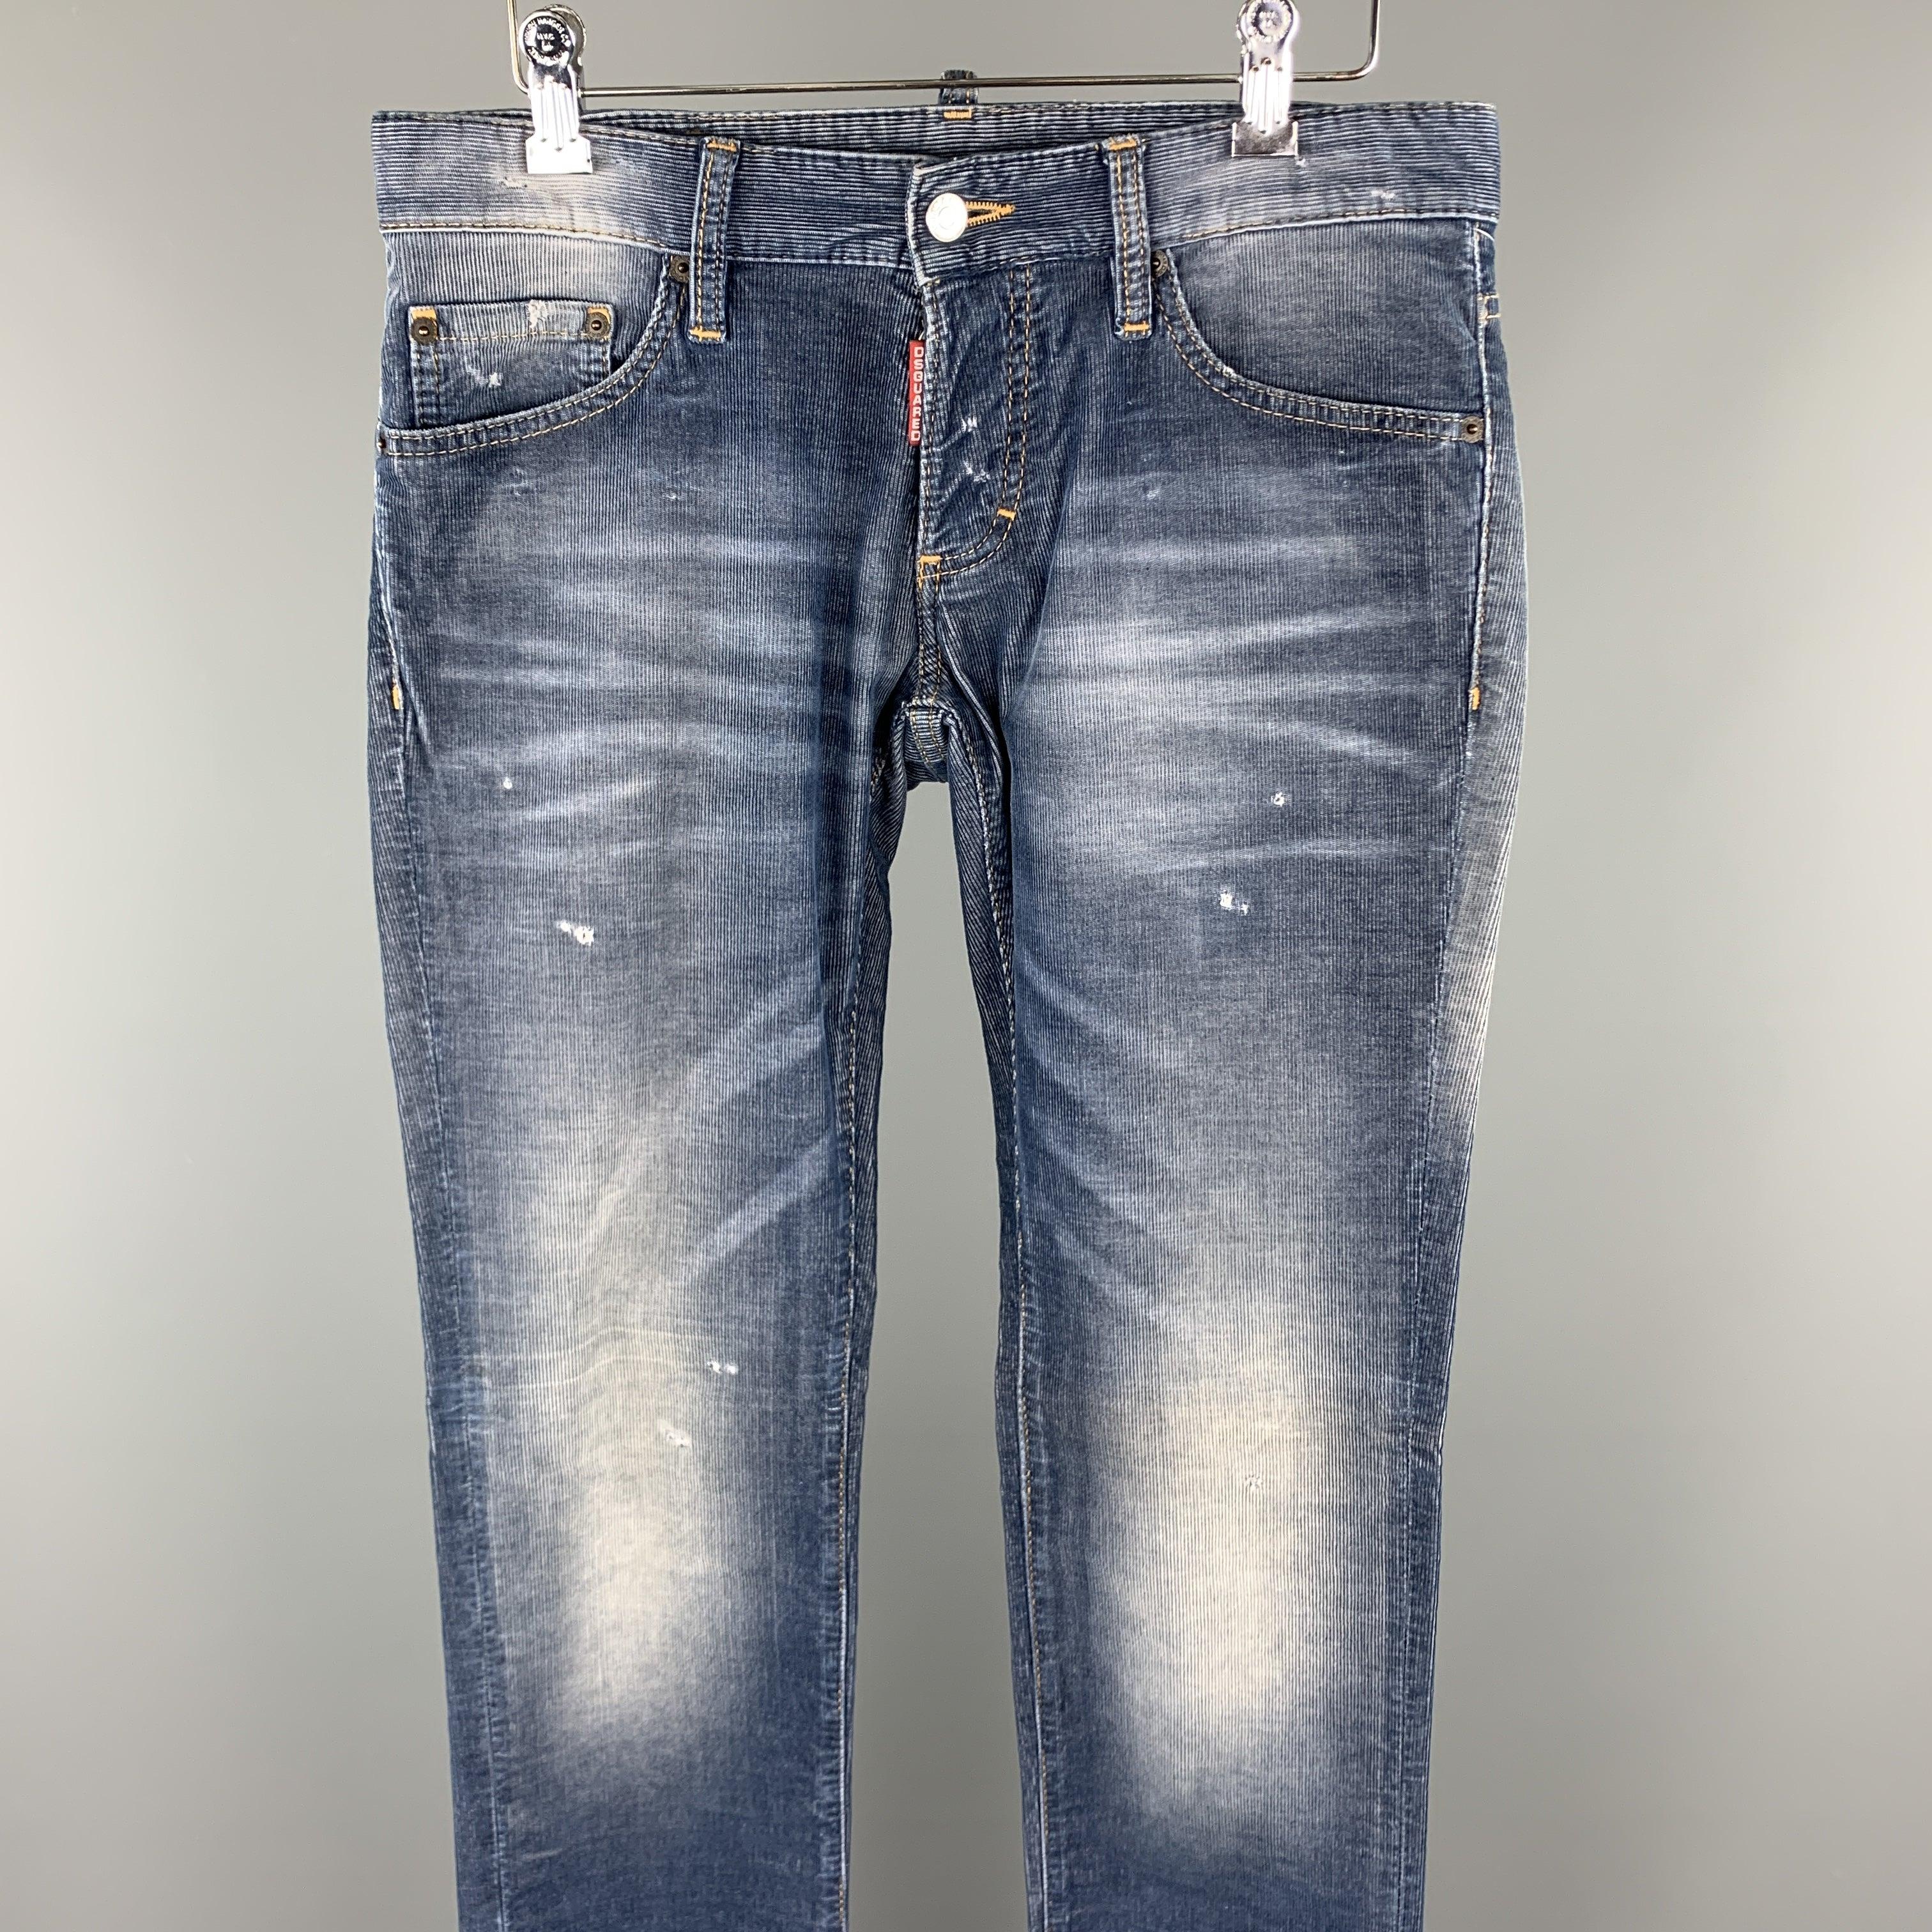 DSQUARED2 casual pants comes in a blue washed corduroy featuring a denim effect, contrast stitching, distressed details, and a button fly closure. Made in Italy.
Excellent
Pre-Owned Condition. 

Marked:   IT 44 

Measurements: 
  Waist: 32 inches